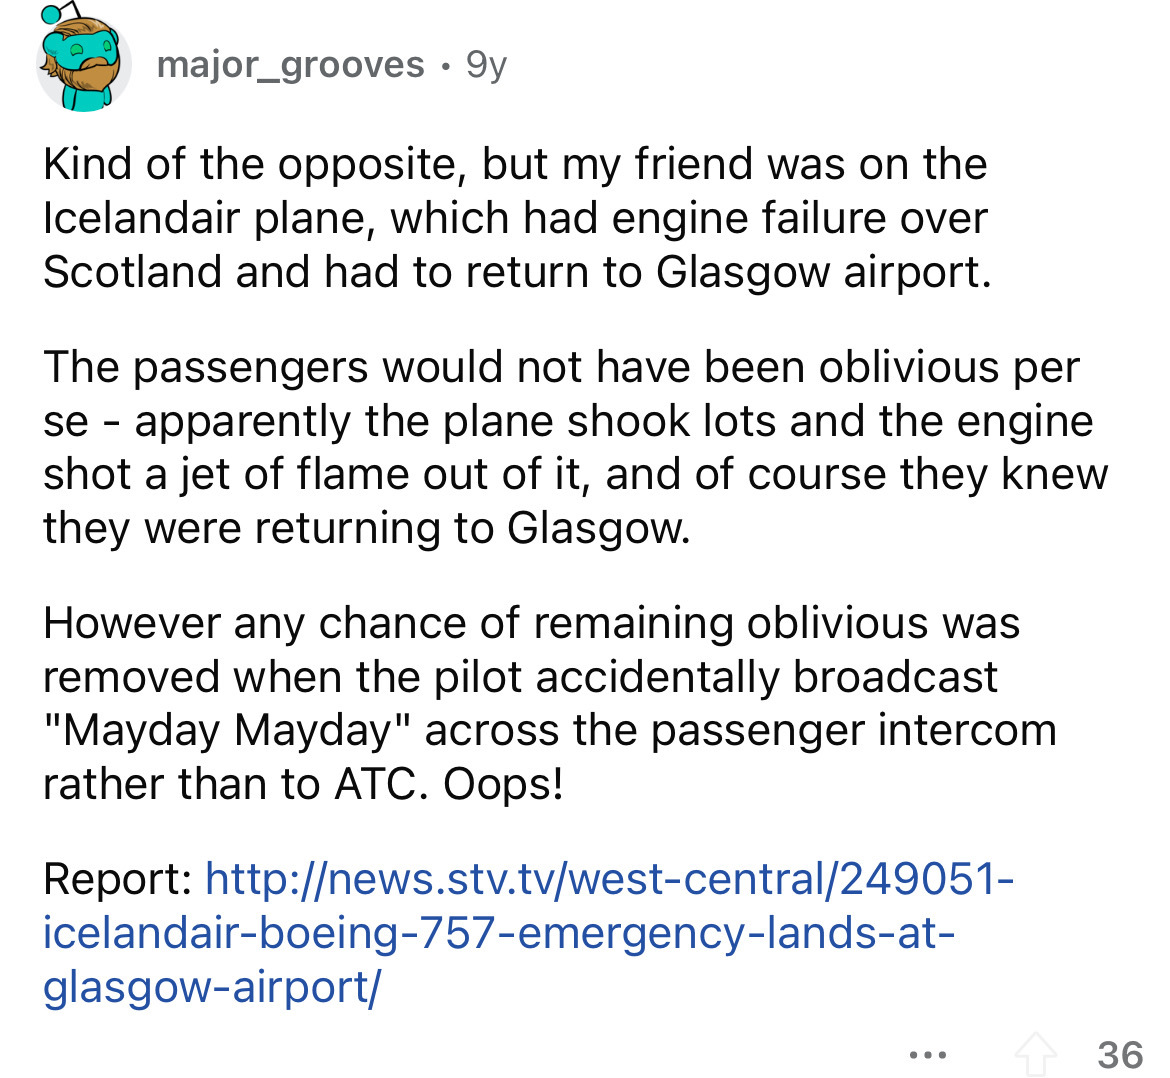 funny scenarios - major_grooves 9y Kind of the opposite, but my friend was on the Icelandair plane, which had engine failure over Scotland and had to return to Glasgow airport. The passengers would not have been oblivious per se apparently the plane shook